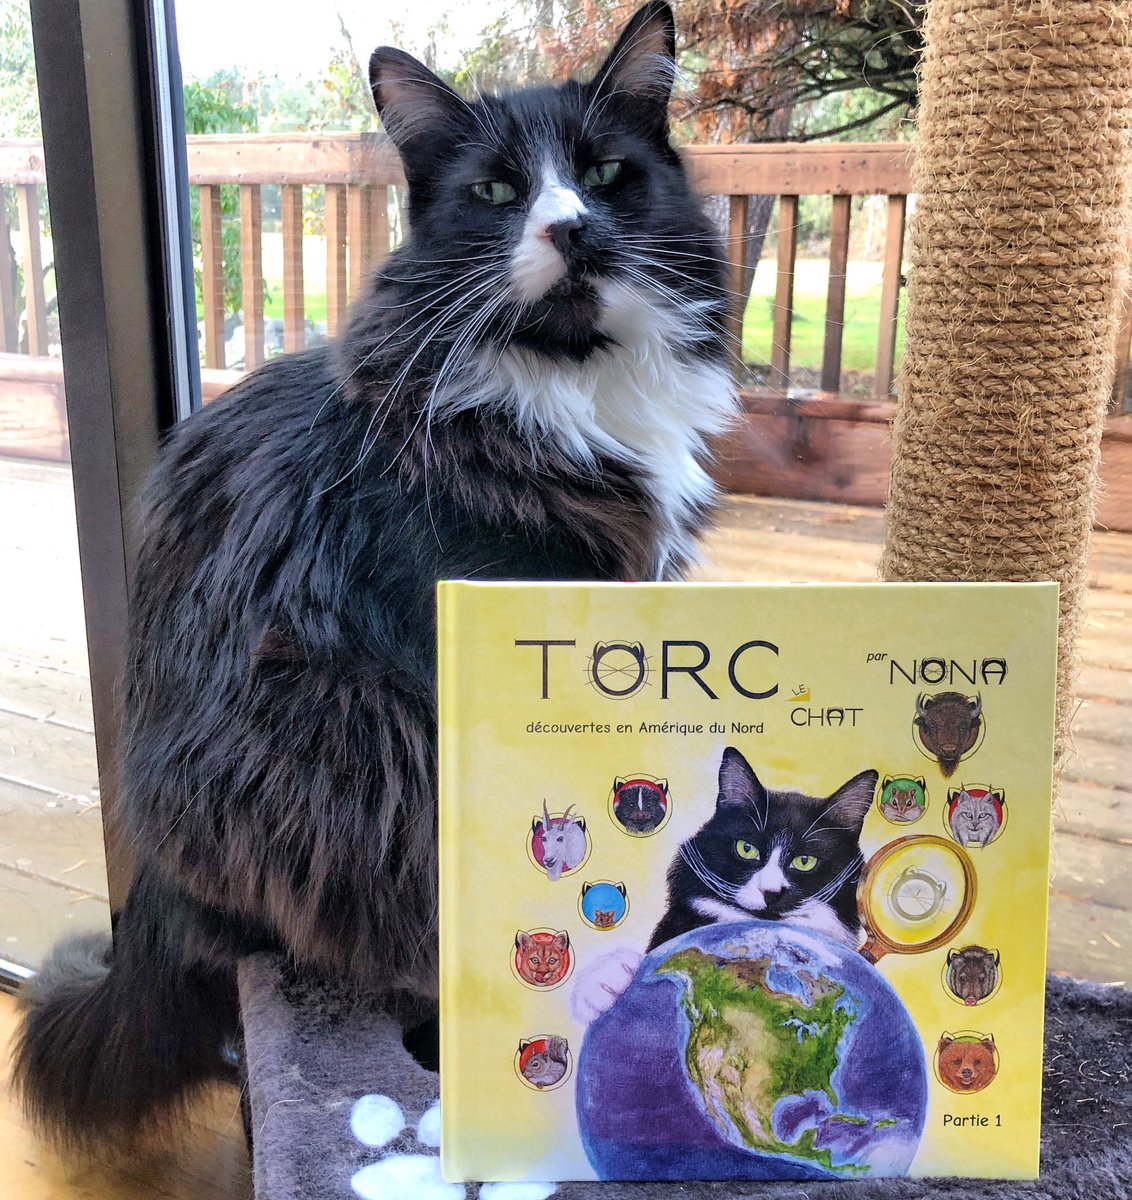 Have a great weekend! 

Did you know TORC’s first book was translated into 4 languages: French, Spanish, Japanese, and Romanian? 

#Caturday #adventurebook #animalbook #smileswithtorc #bookseries